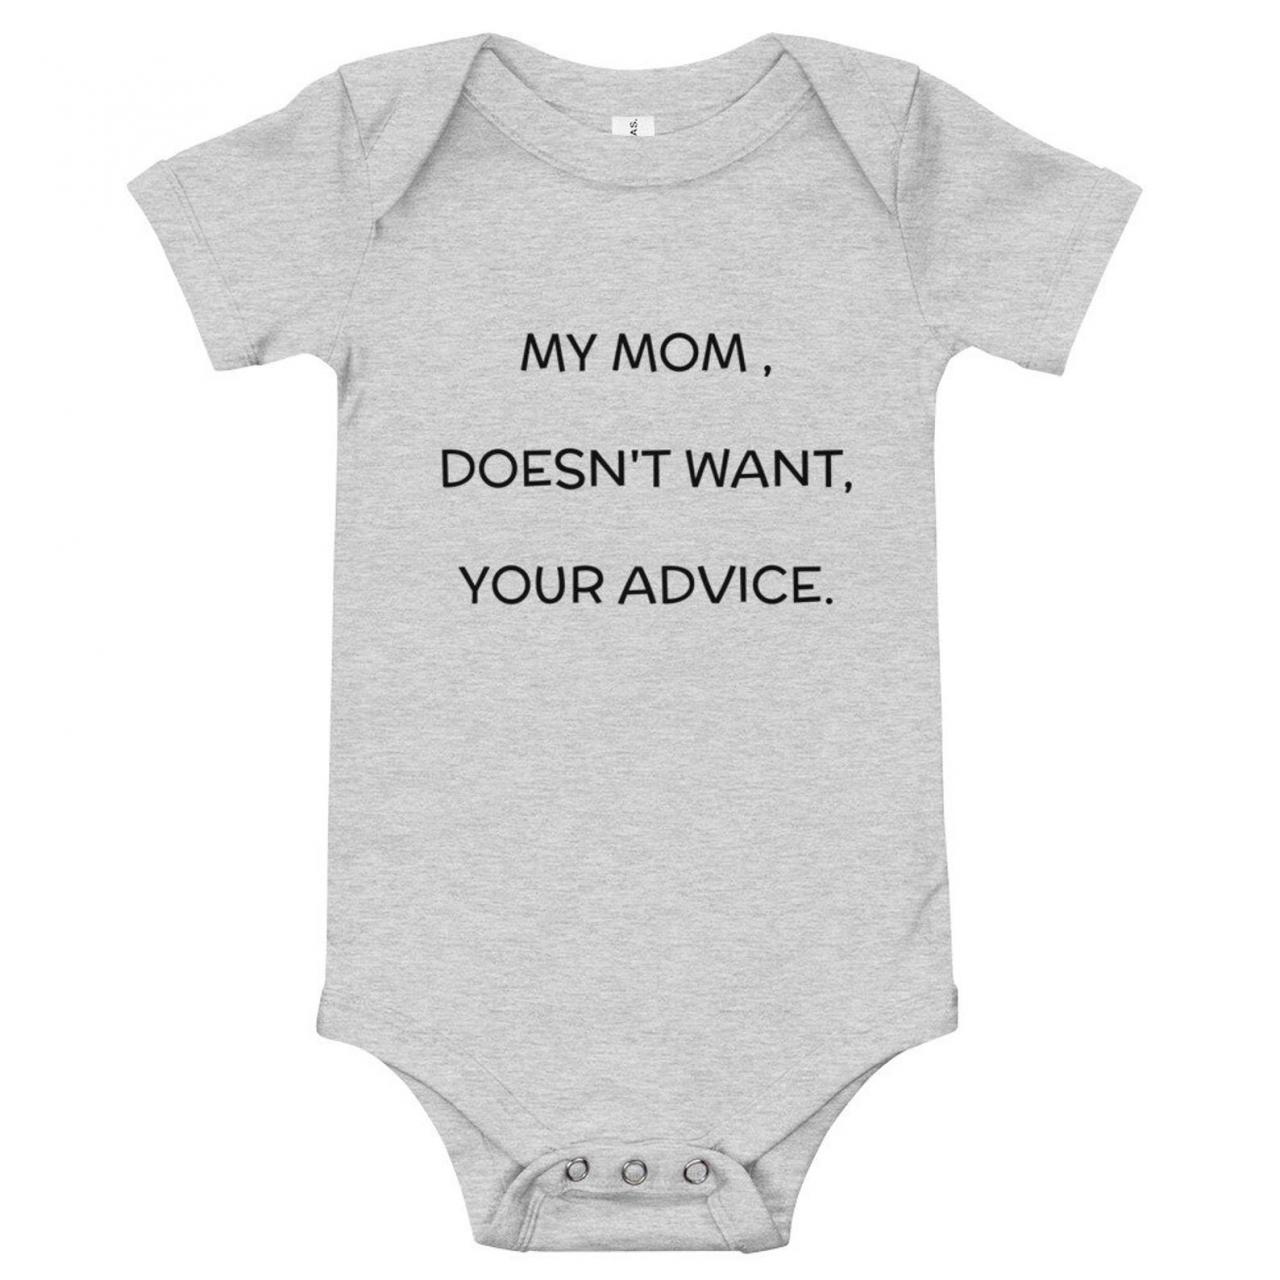 My Mom Doesn't Want Your Advice.funny Baby Onesies®, Baby Shower Gift, Funny Baby Bodysuit